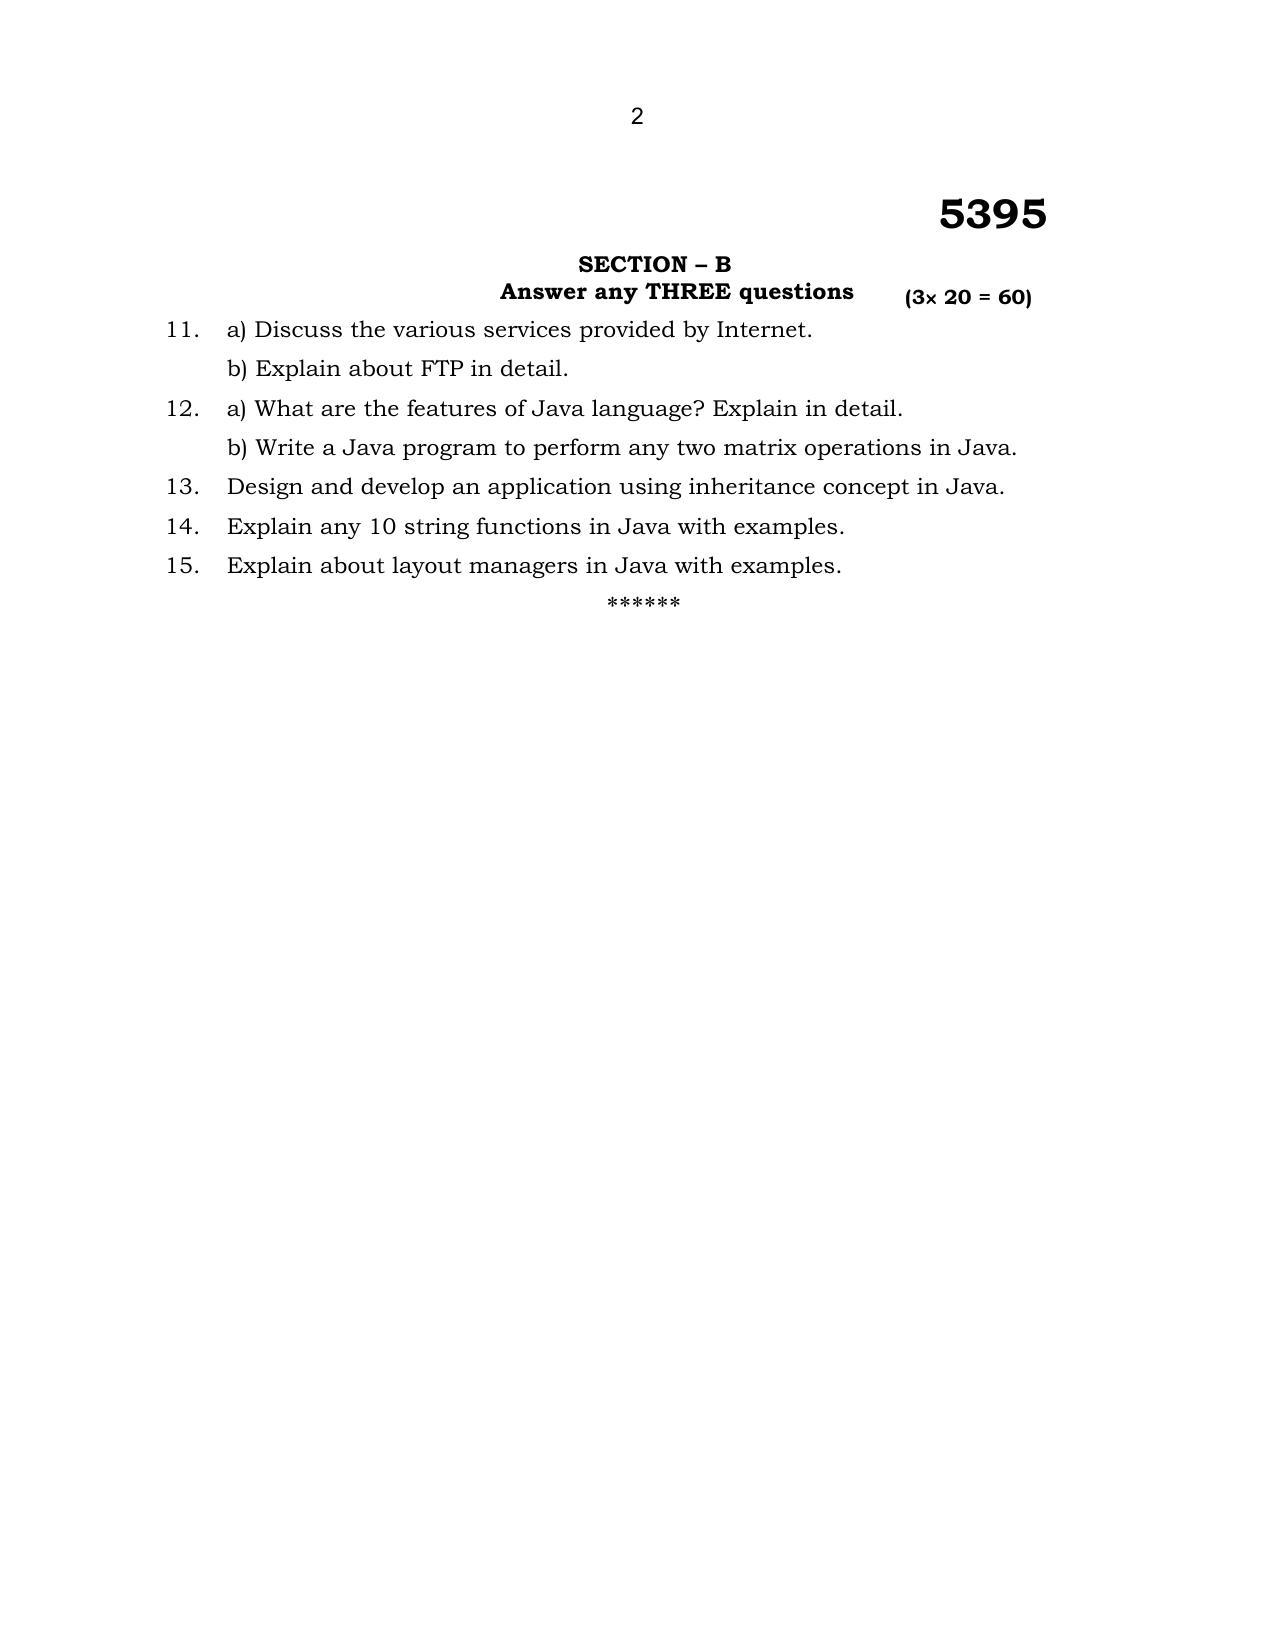 Annamalai University Internet And Java Programming B.C.A. (OUS) December 2014 Question Papers - Page 2